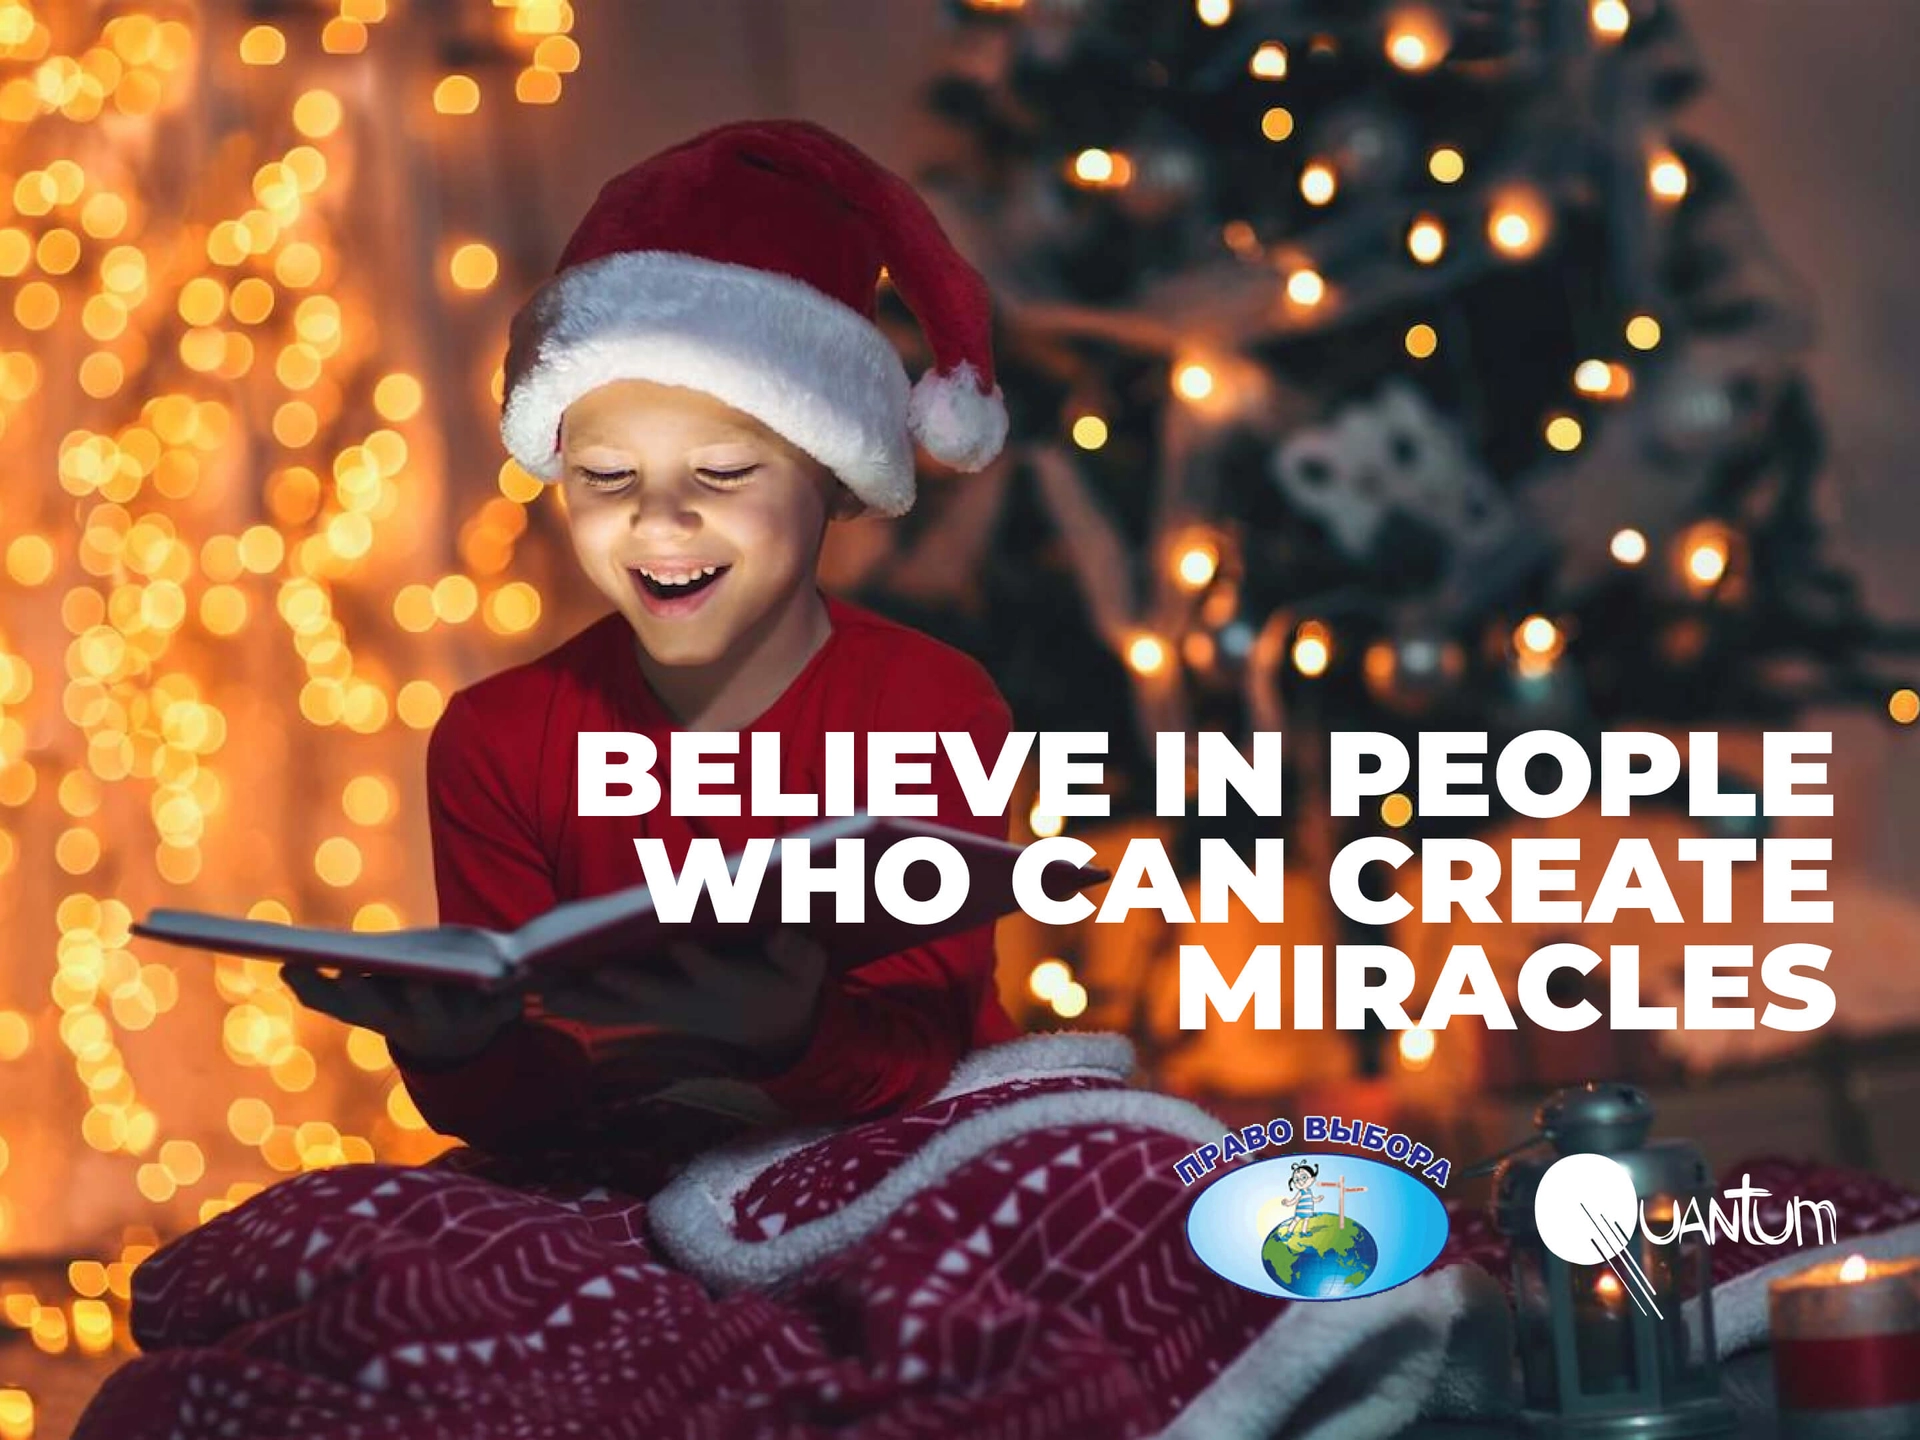 Believe in people who can create miracles